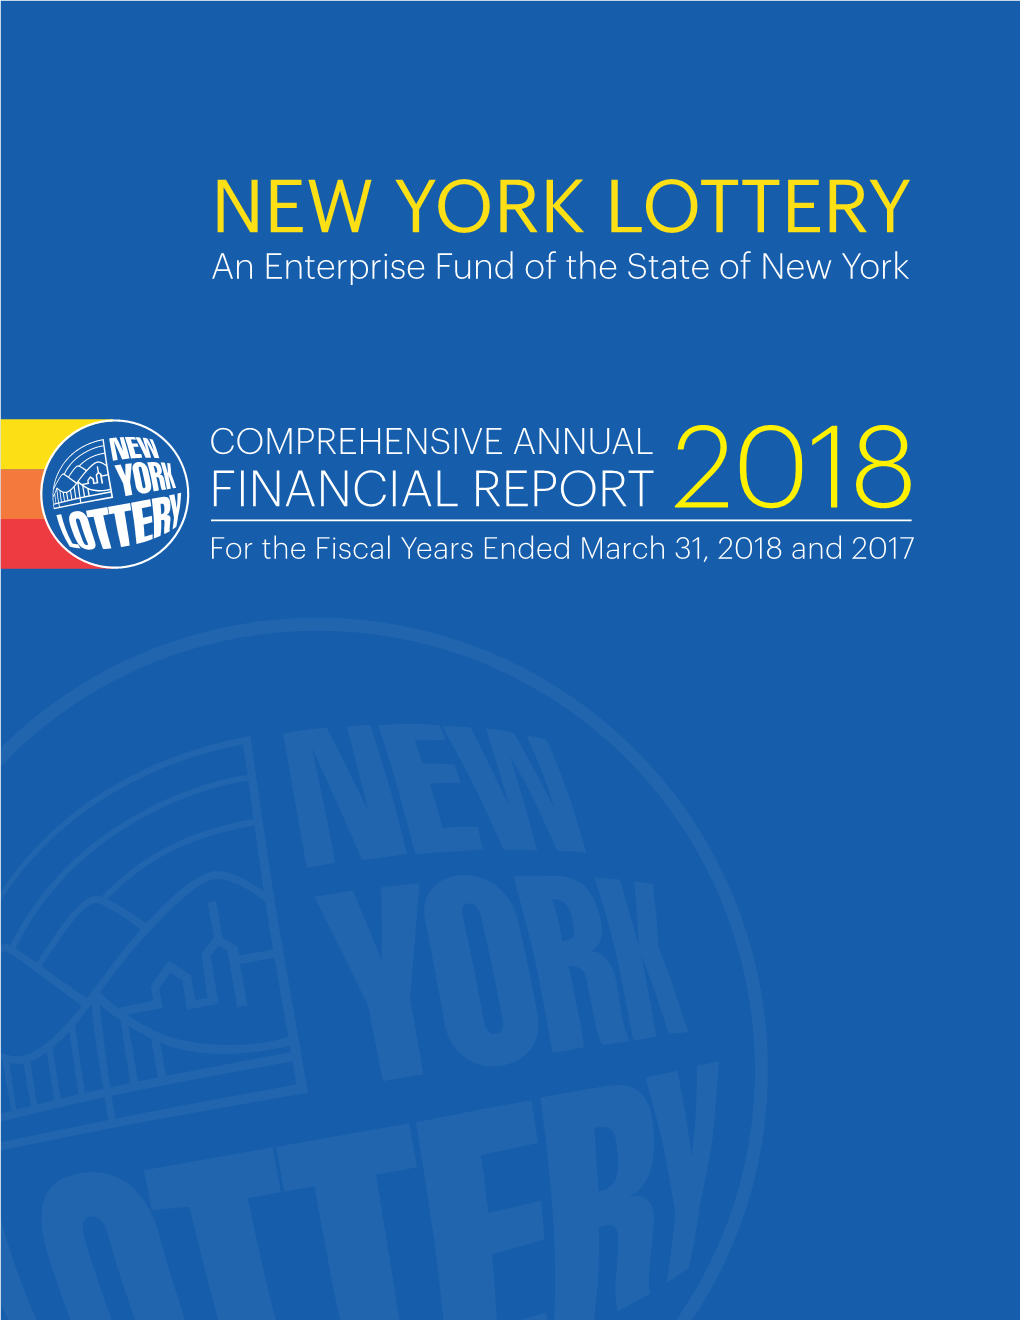 NY Lottery Comprehensive Annual Financial Report